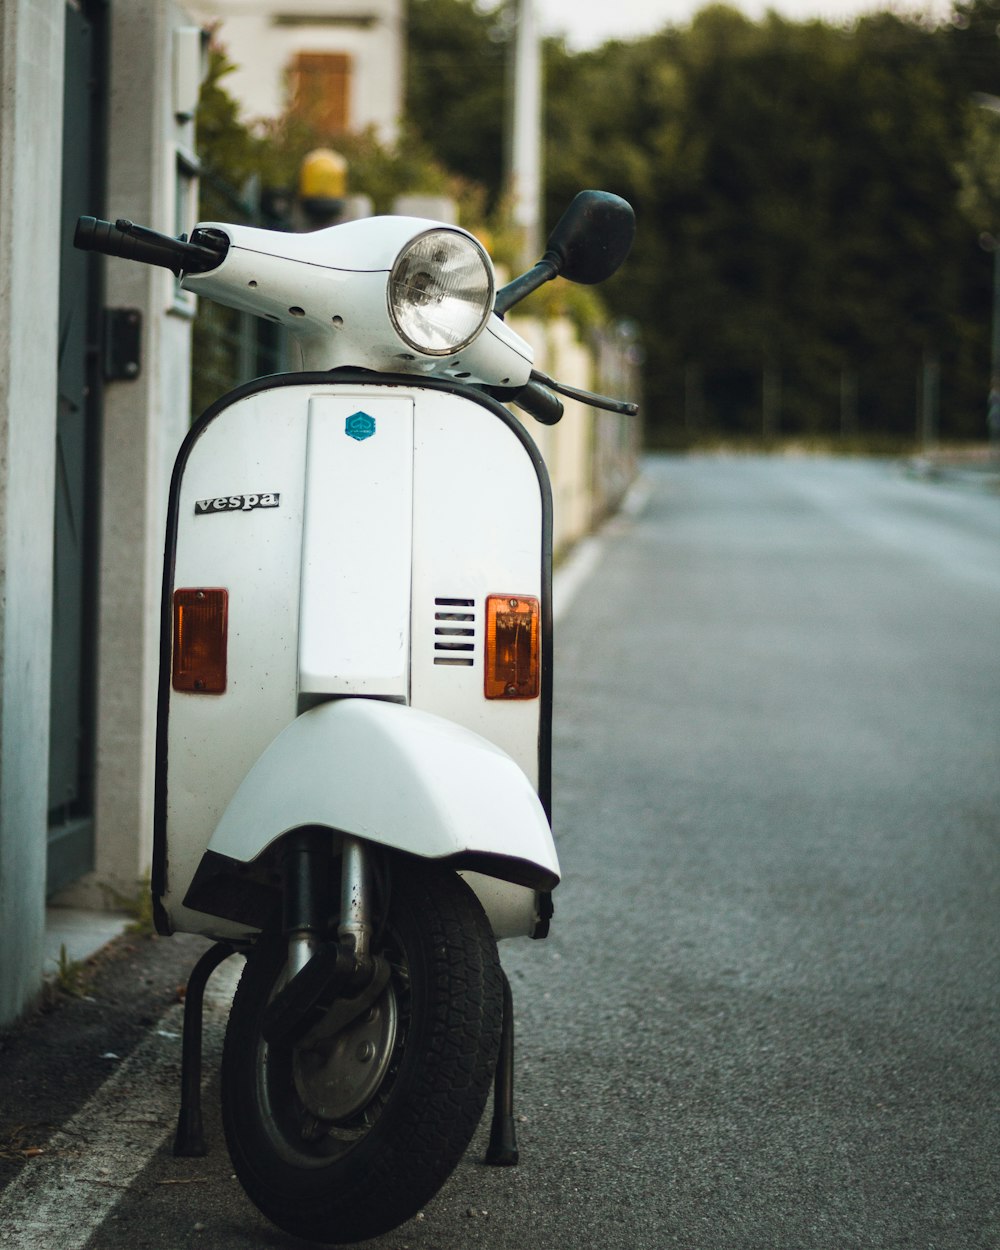 white and black motor scooter on road during daytime